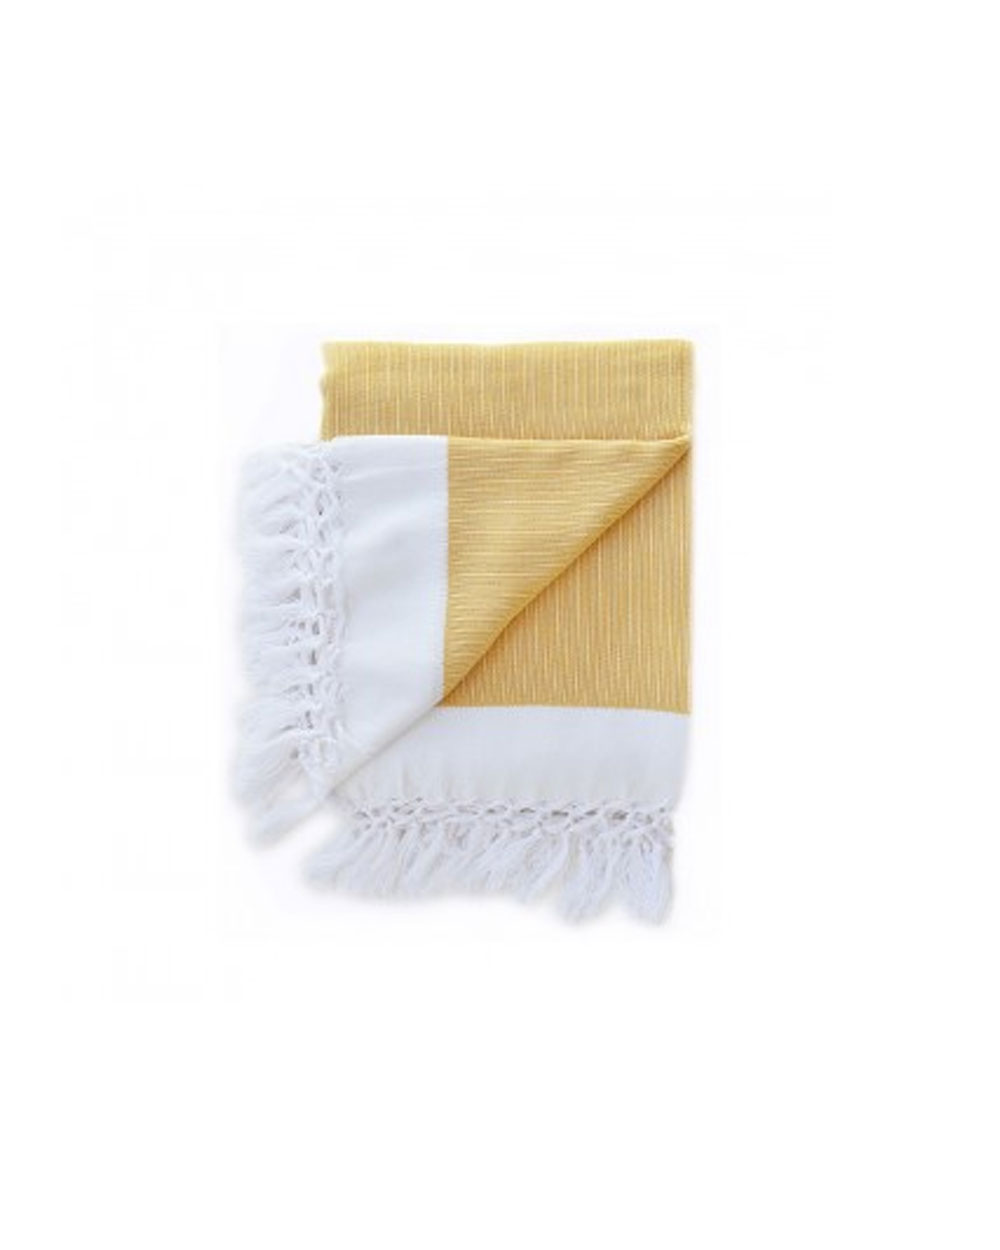 KOZA towel from Mildred & Co, $55